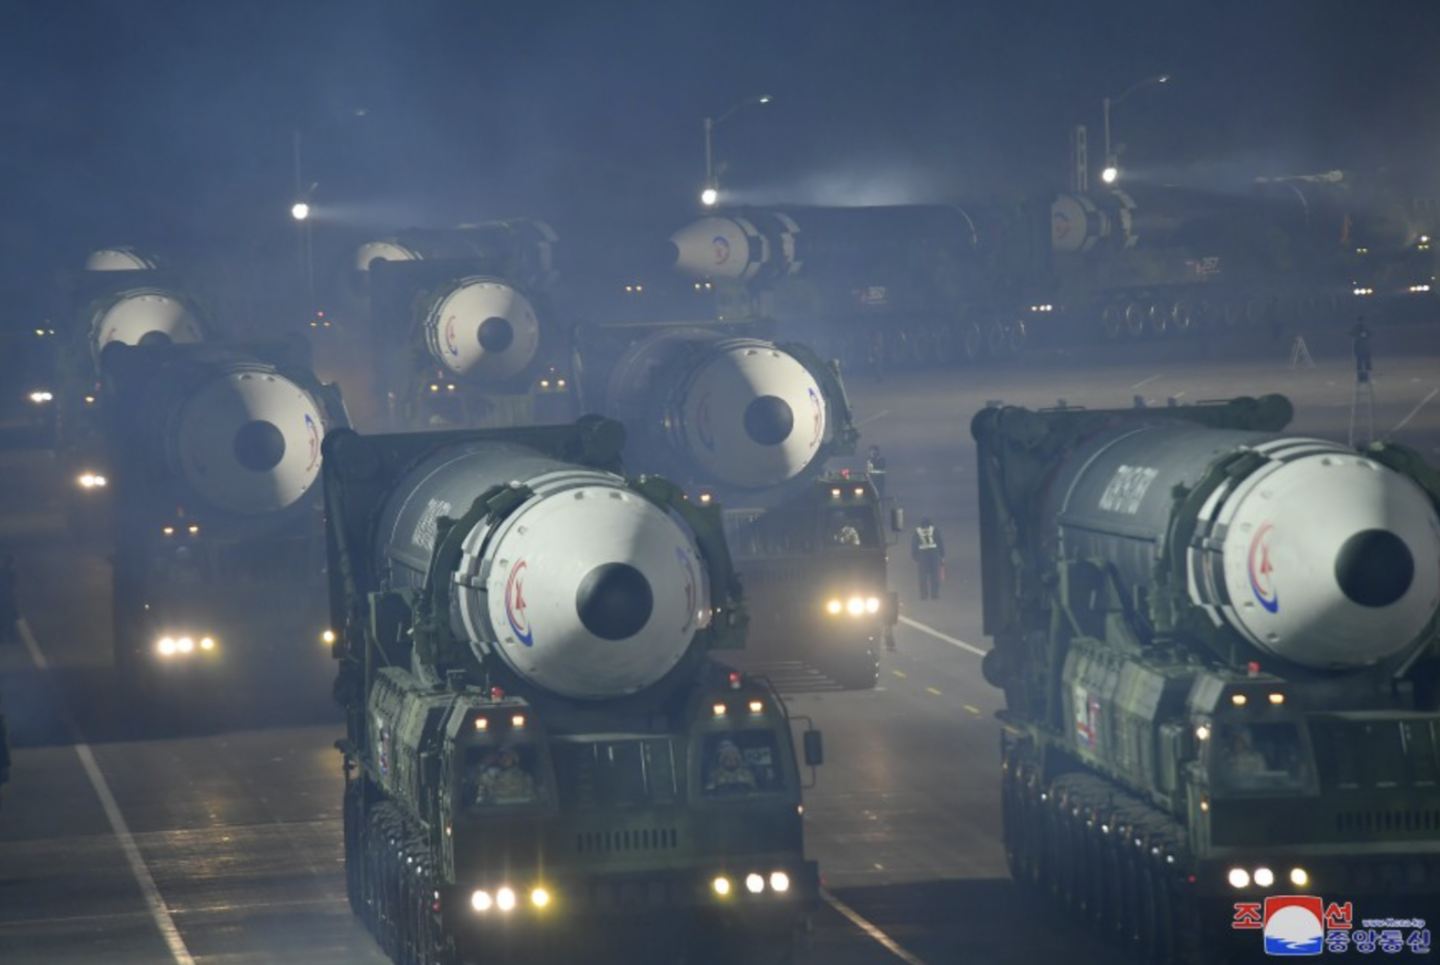 Multiple examples of the Hwasong-17 ICBM roll through Pyongyang during a parade last month. At least 10 are visible here.&nbsp;<em>KCNA</em><br>